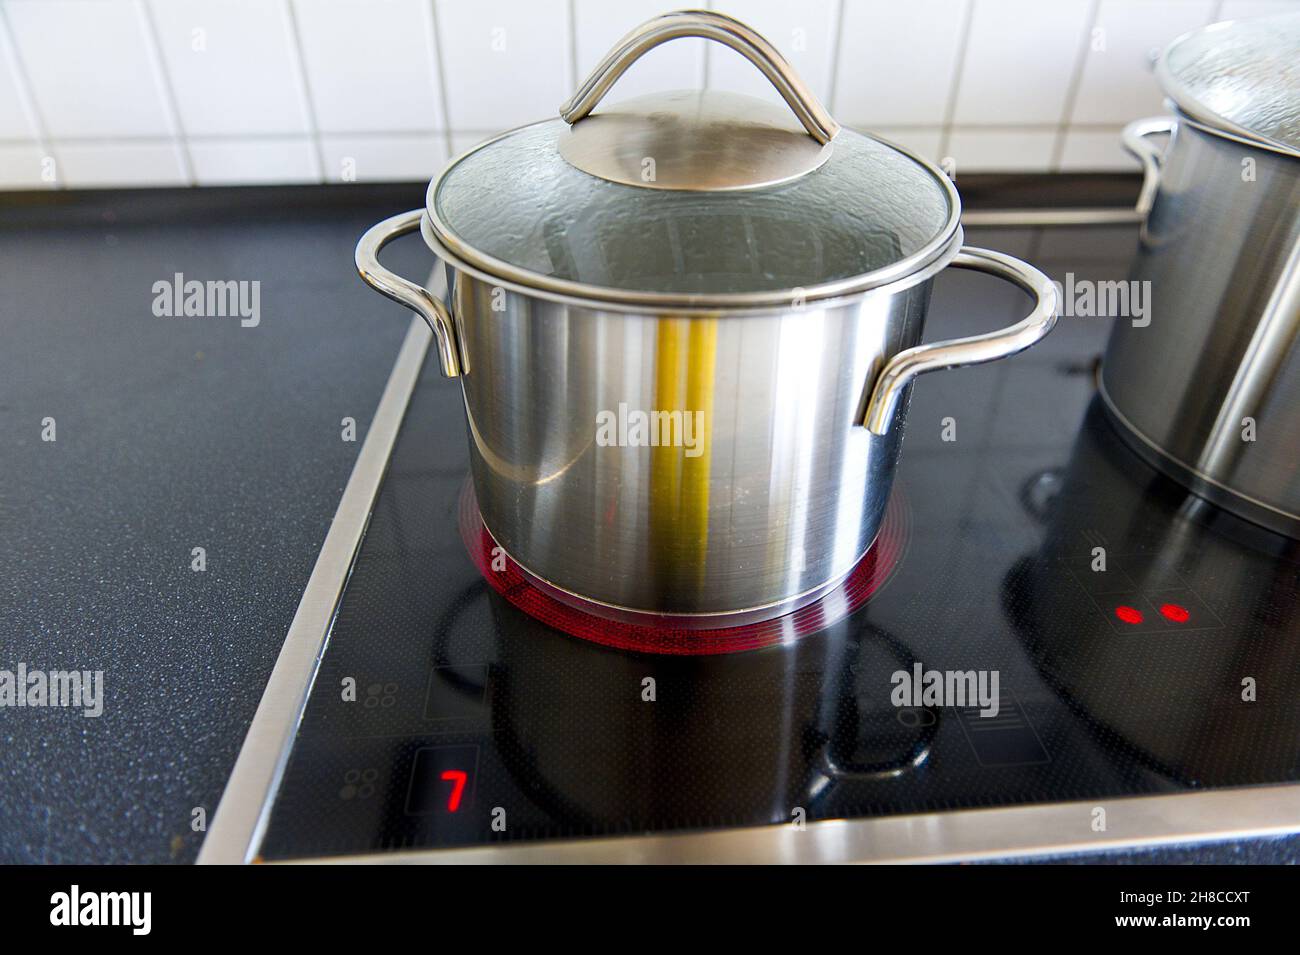 cooking pot on zo large hotplate, waste of energy Stock Photo